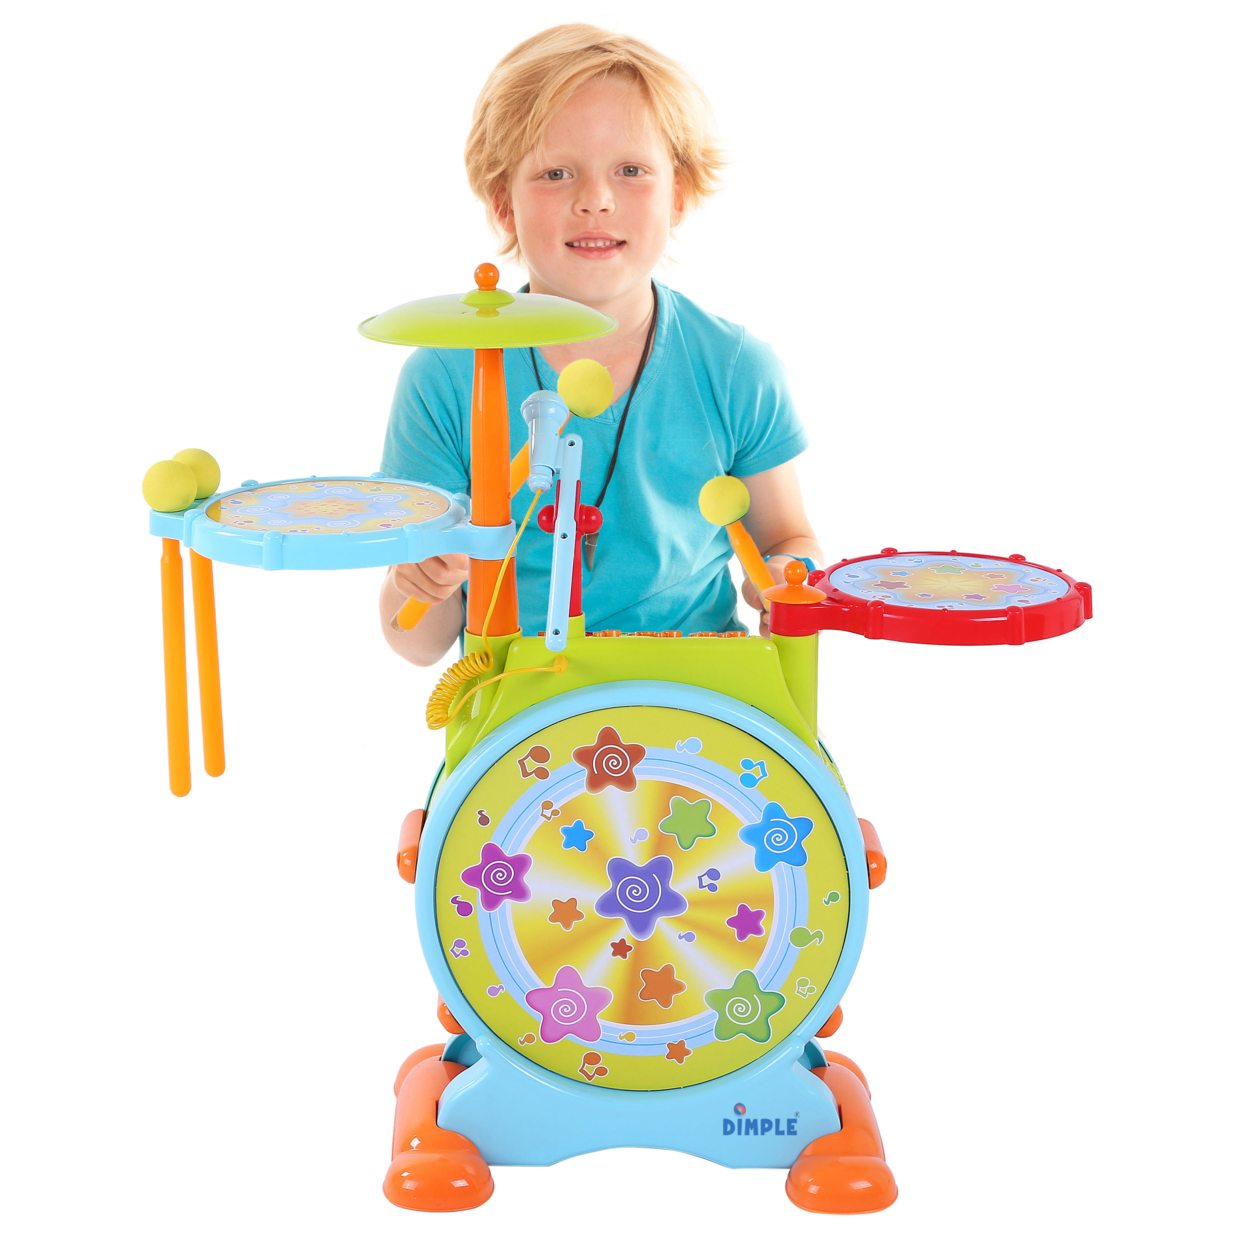 Dimple Toy Electric Guitar With Over 20 Interactive Buttons And Electric Big Toy Drum Set For Kids Comes With Microphone Pedal And Stool